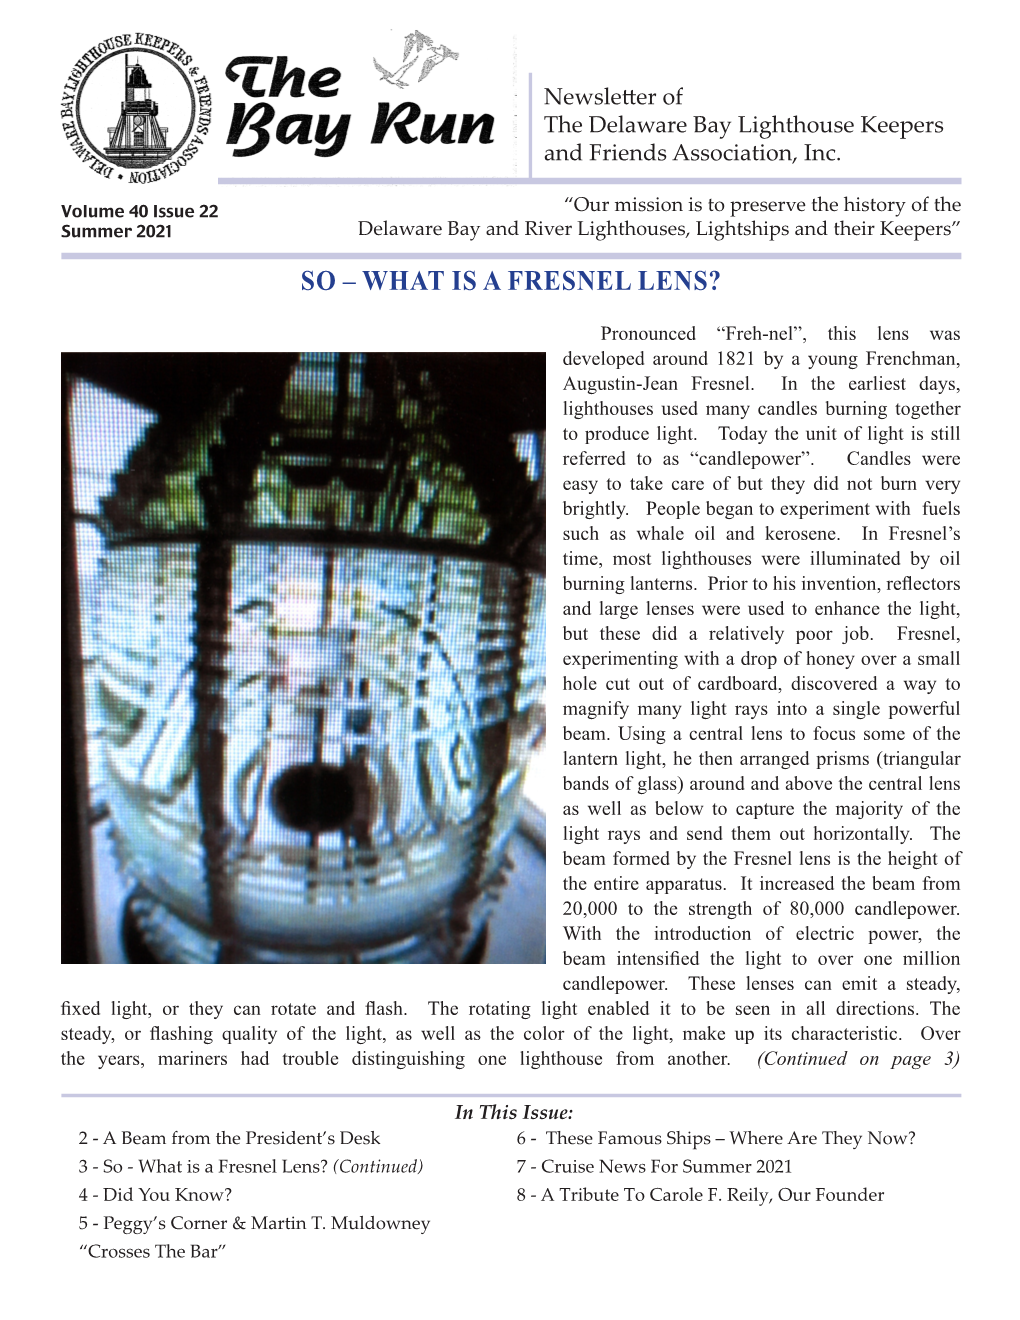 So – What Is a Fresnel Lens?